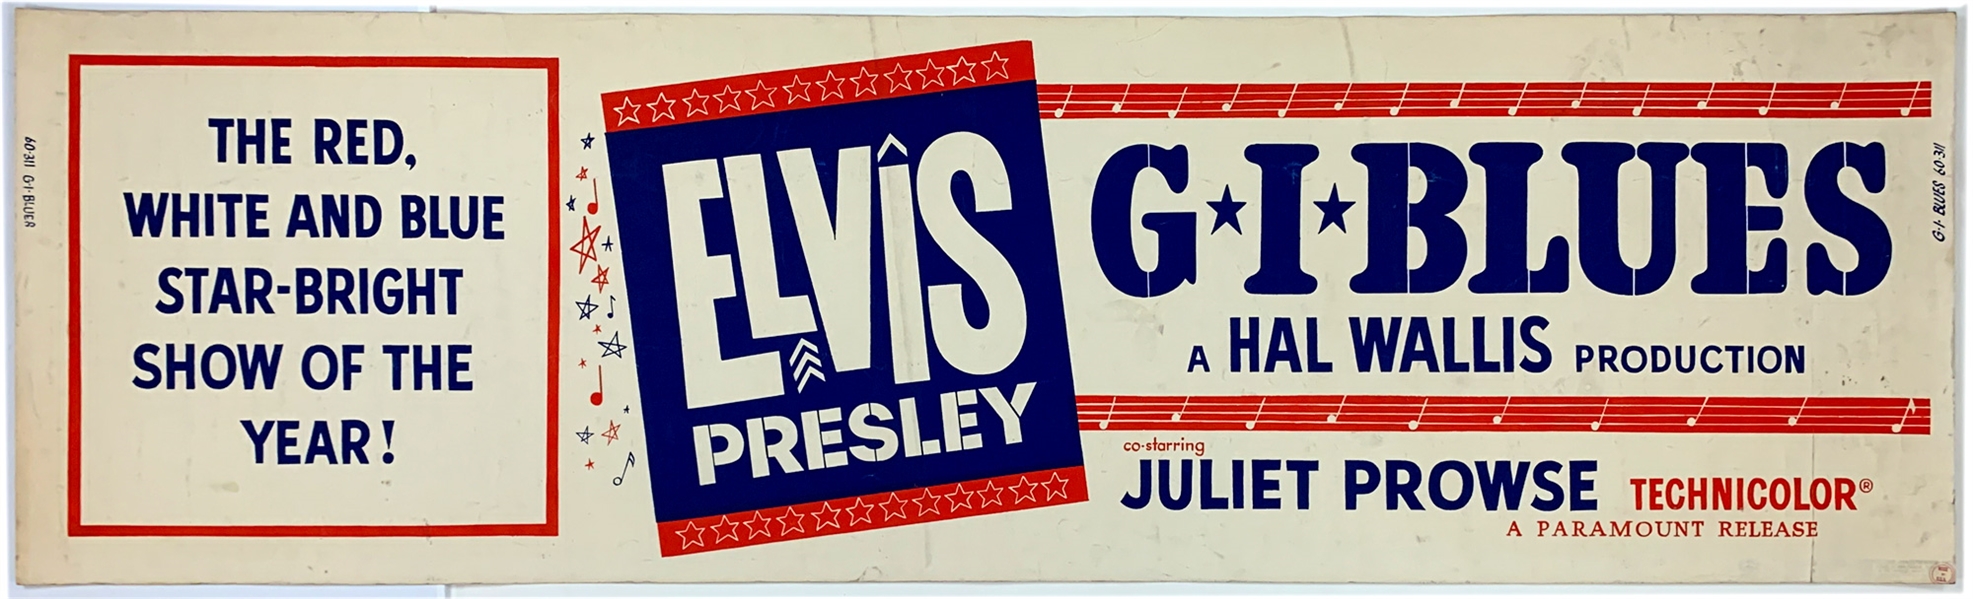 1960 <em>G.I. Blues</em> Silk Screened Movie Theatre Paper Banner – 82 Inches in Length! Starring Elvis Presley